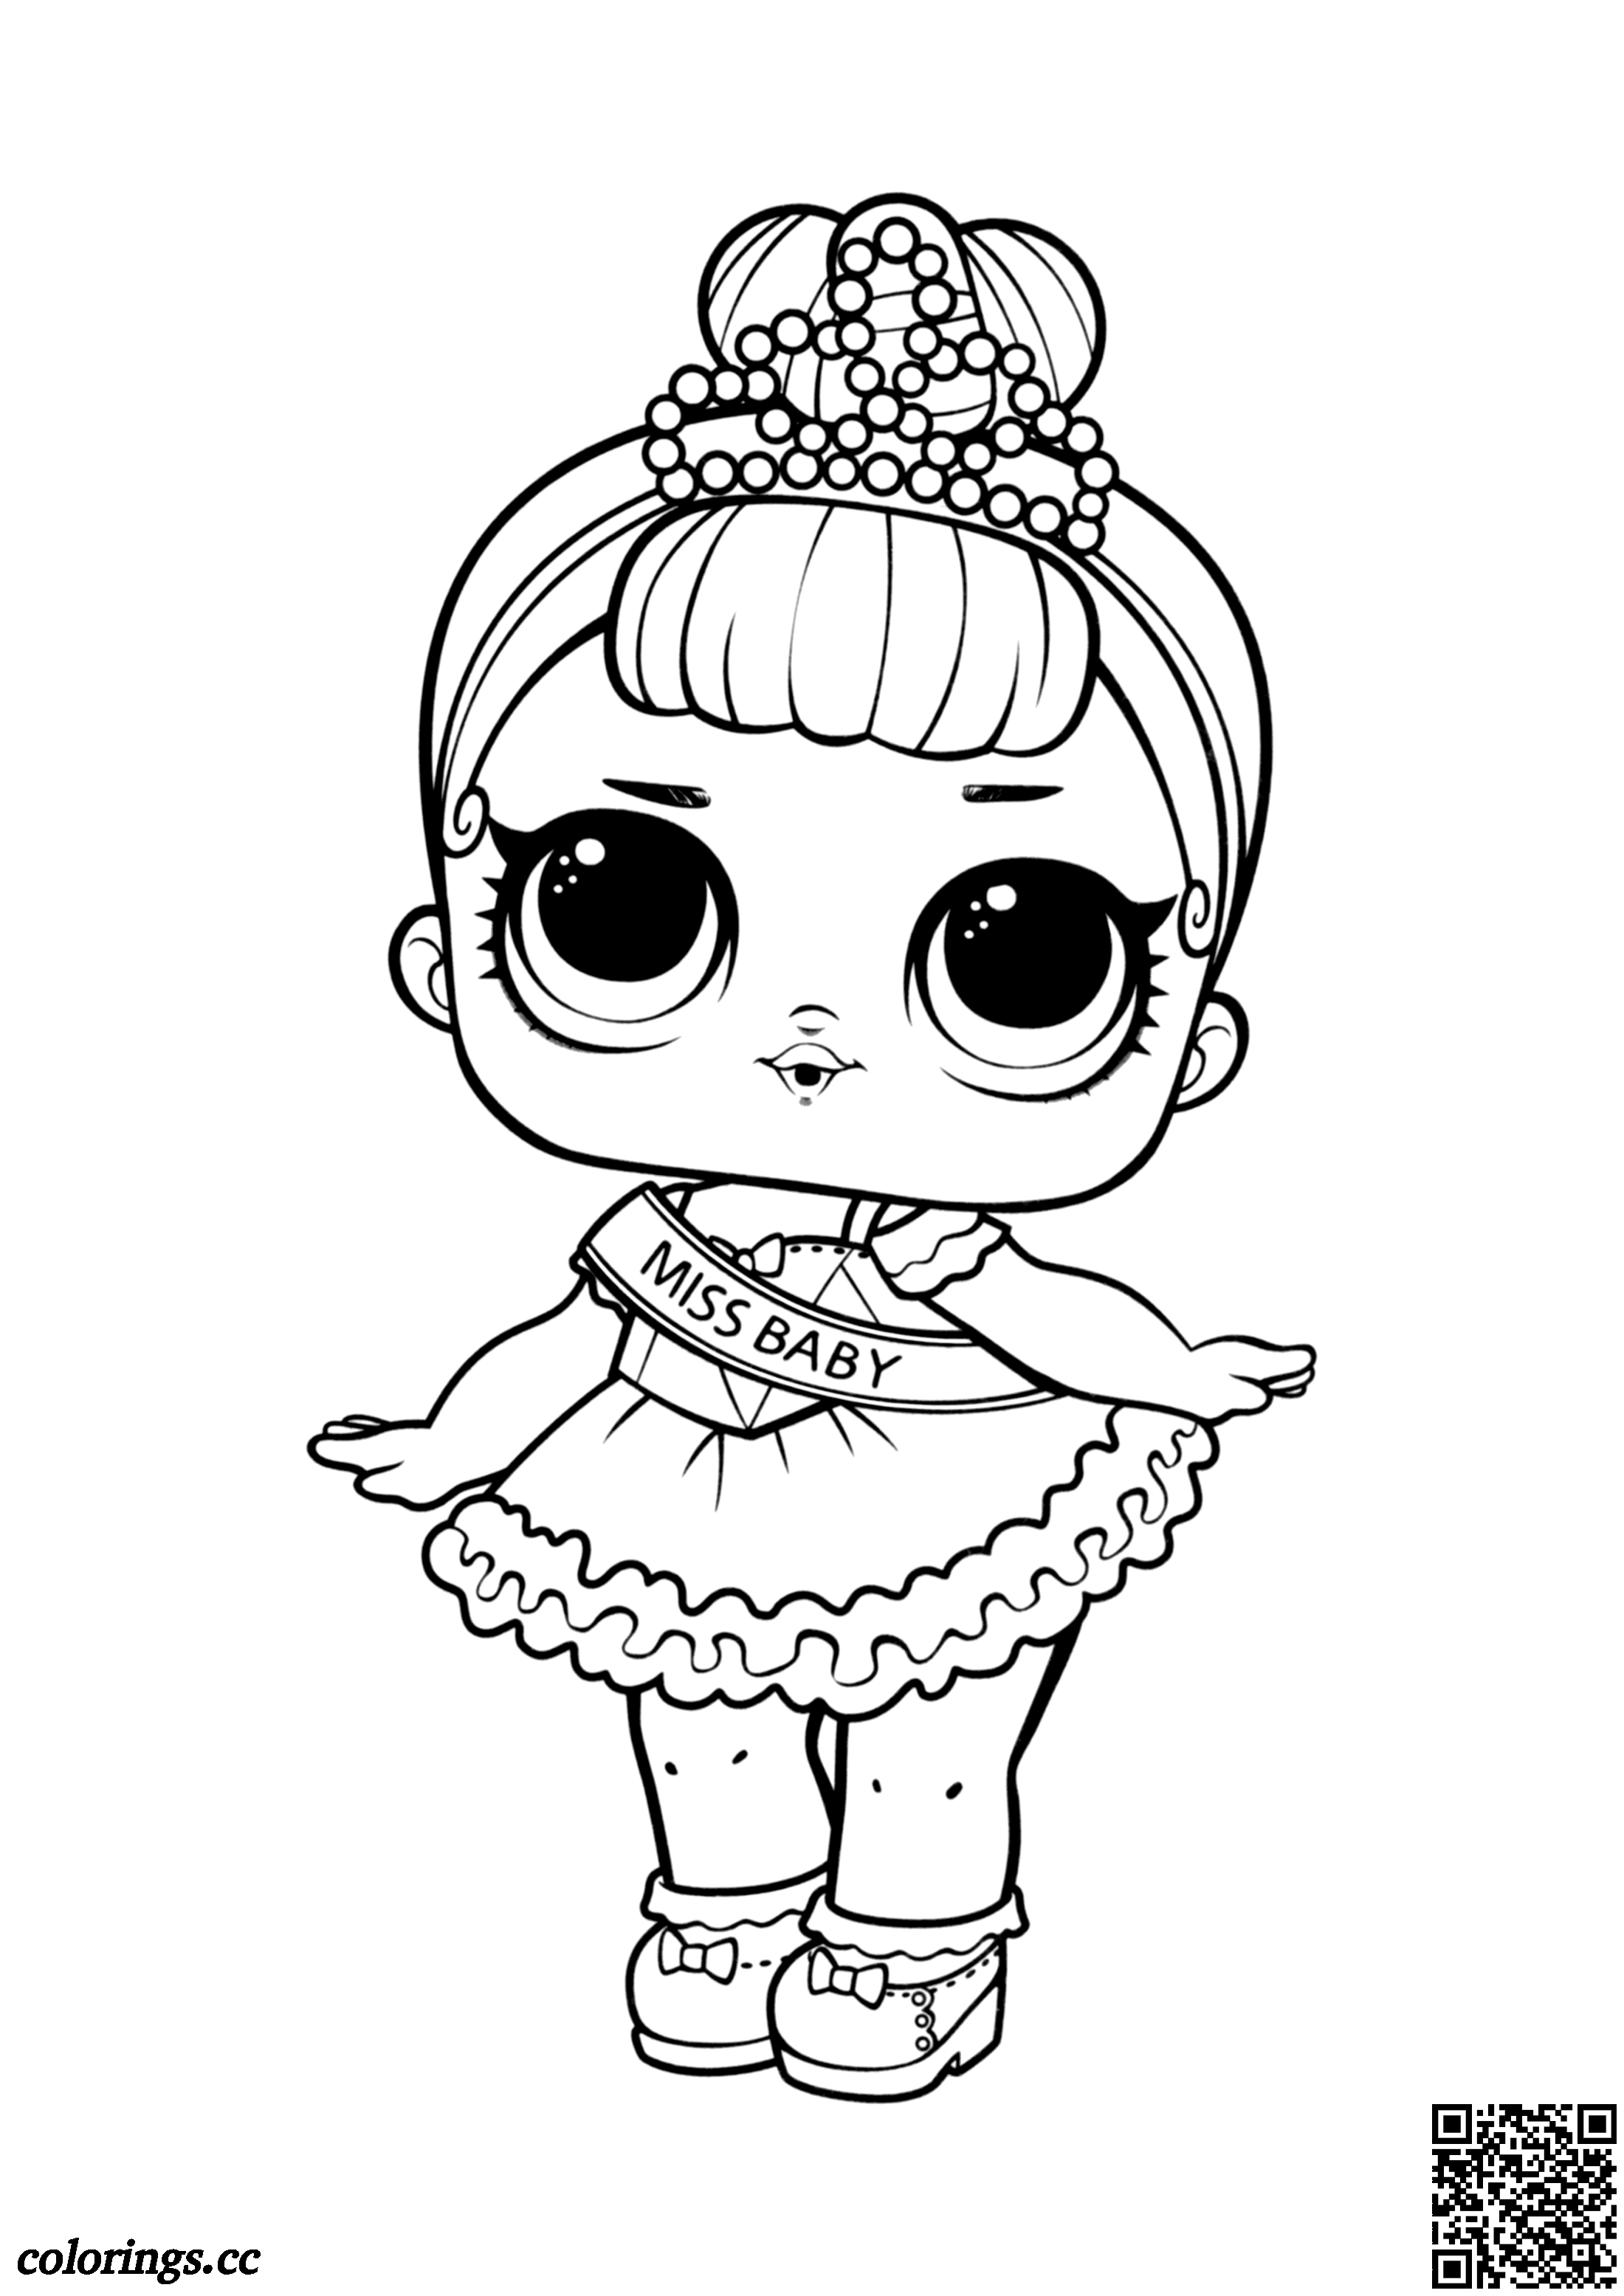 Baby LoL Coloring Pages - Coloring Home